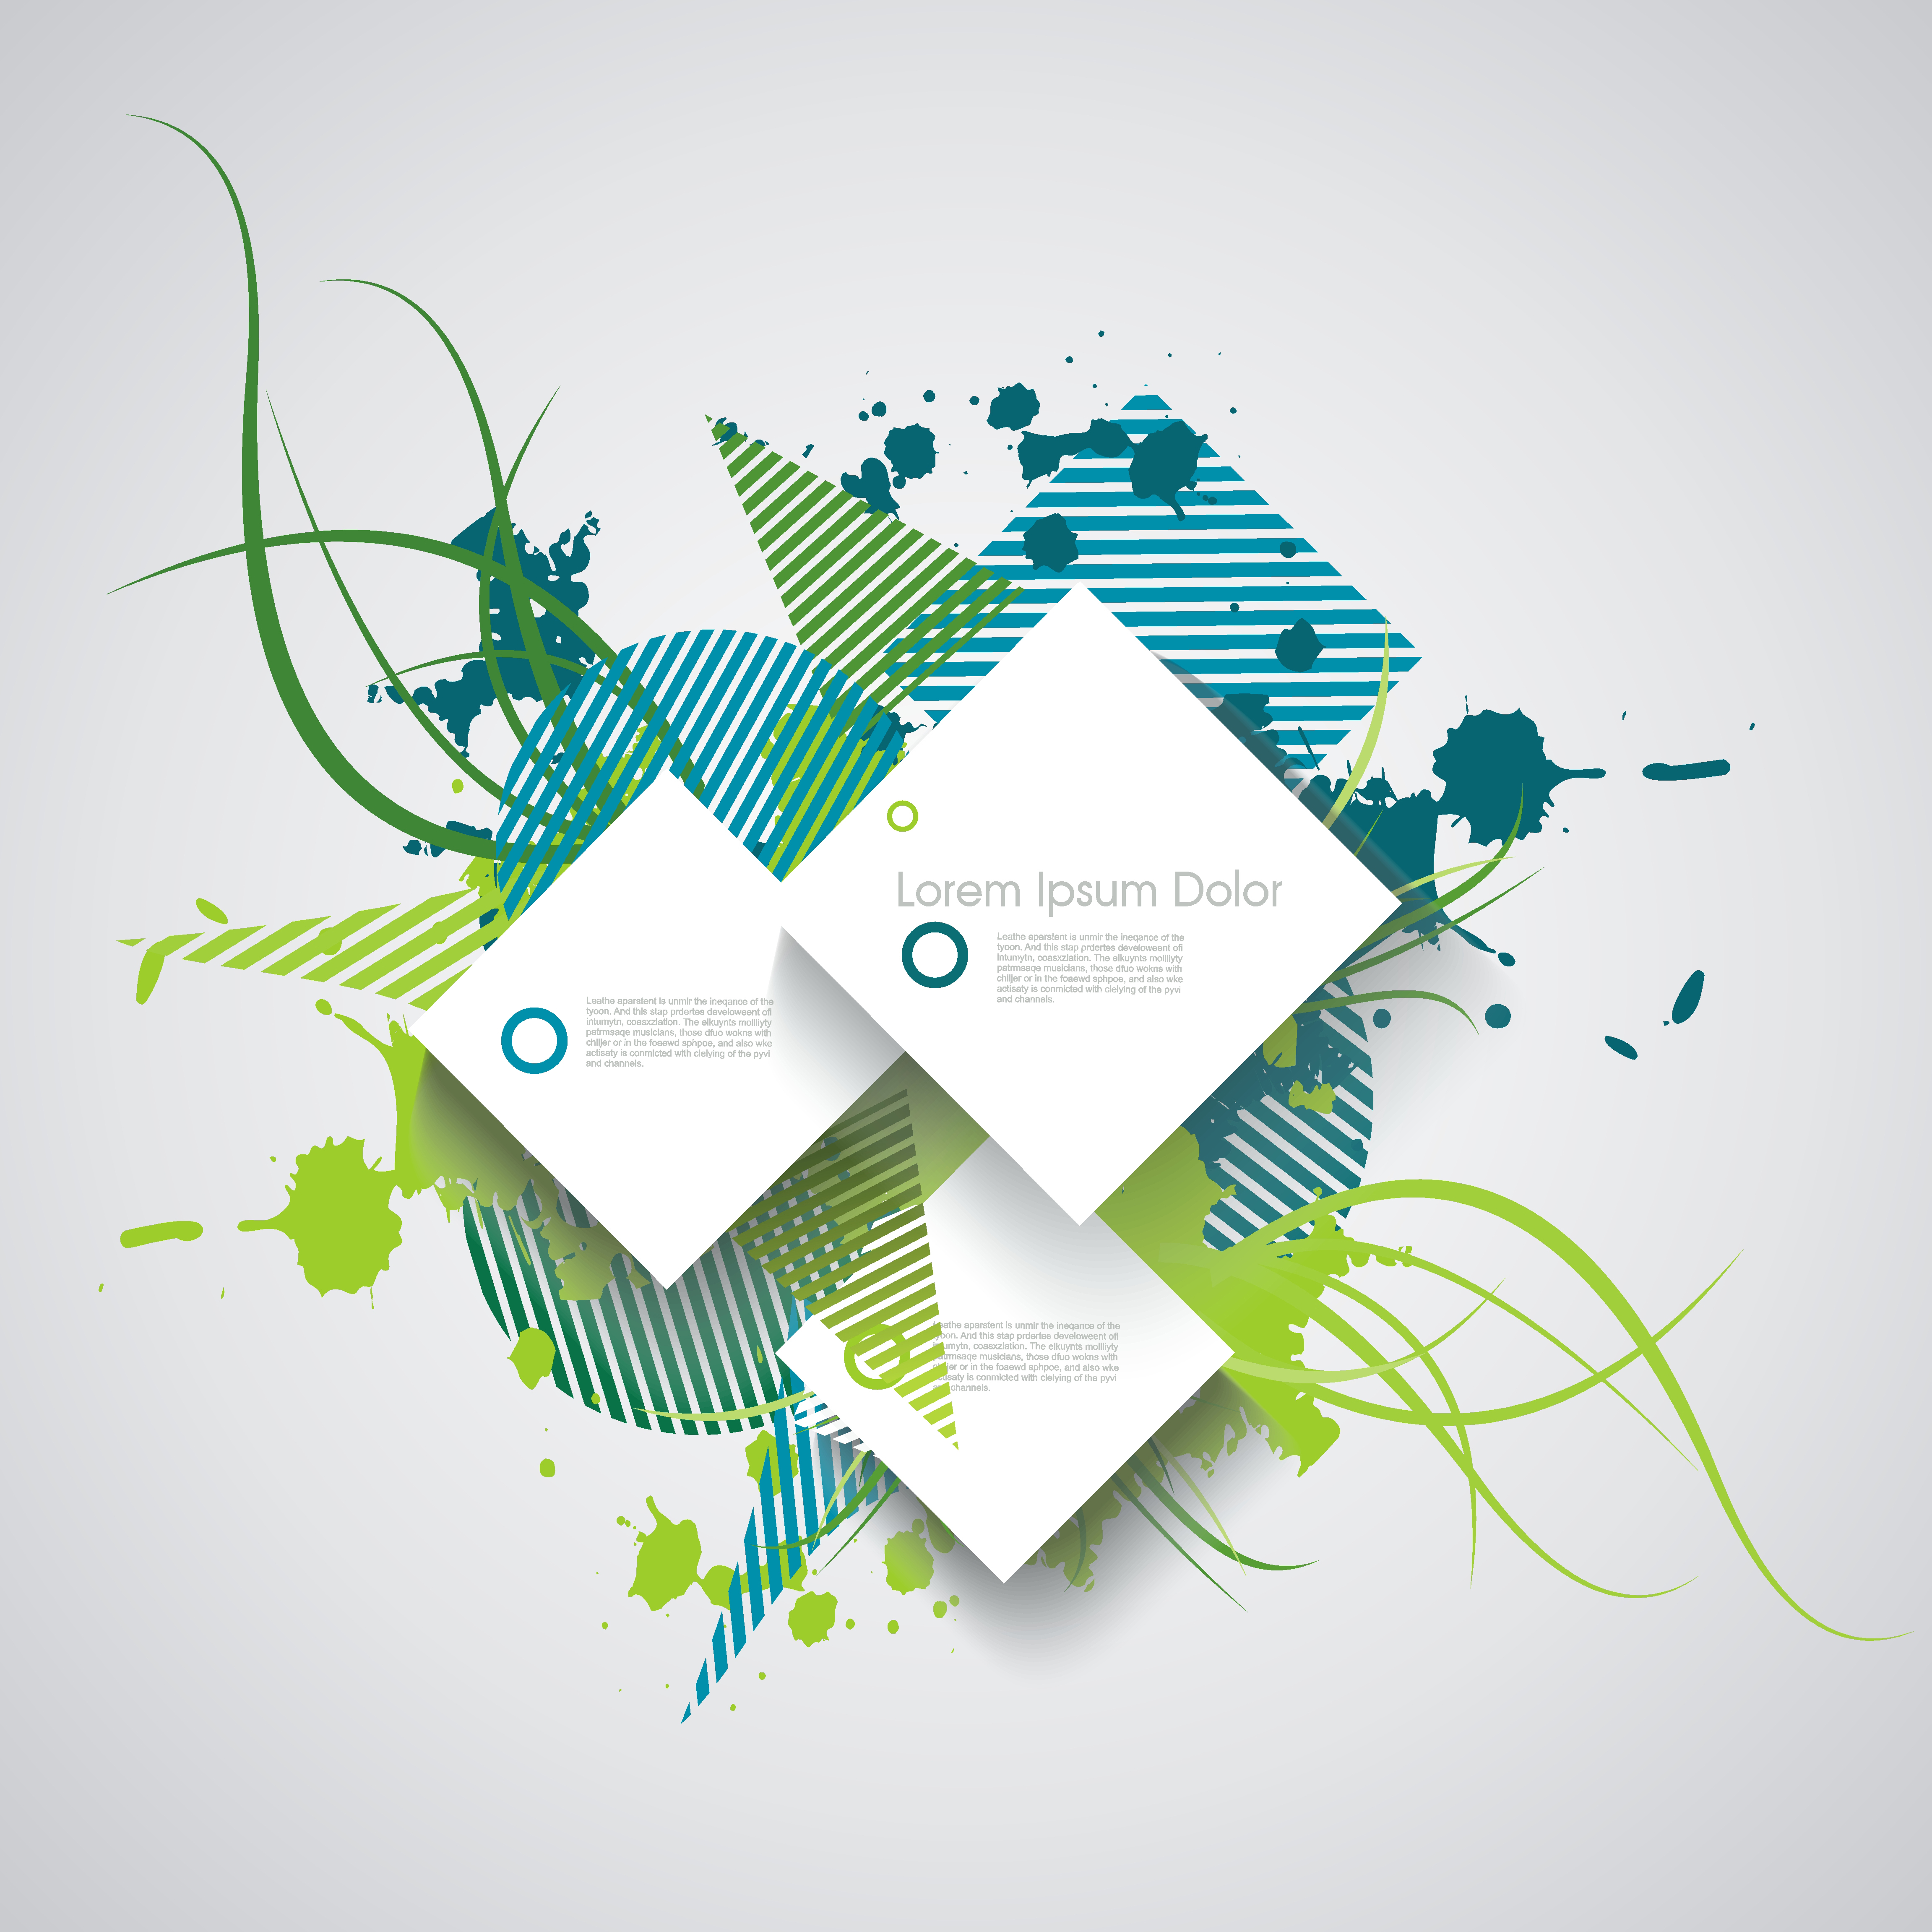 Abstract geometric background, vector illustration.